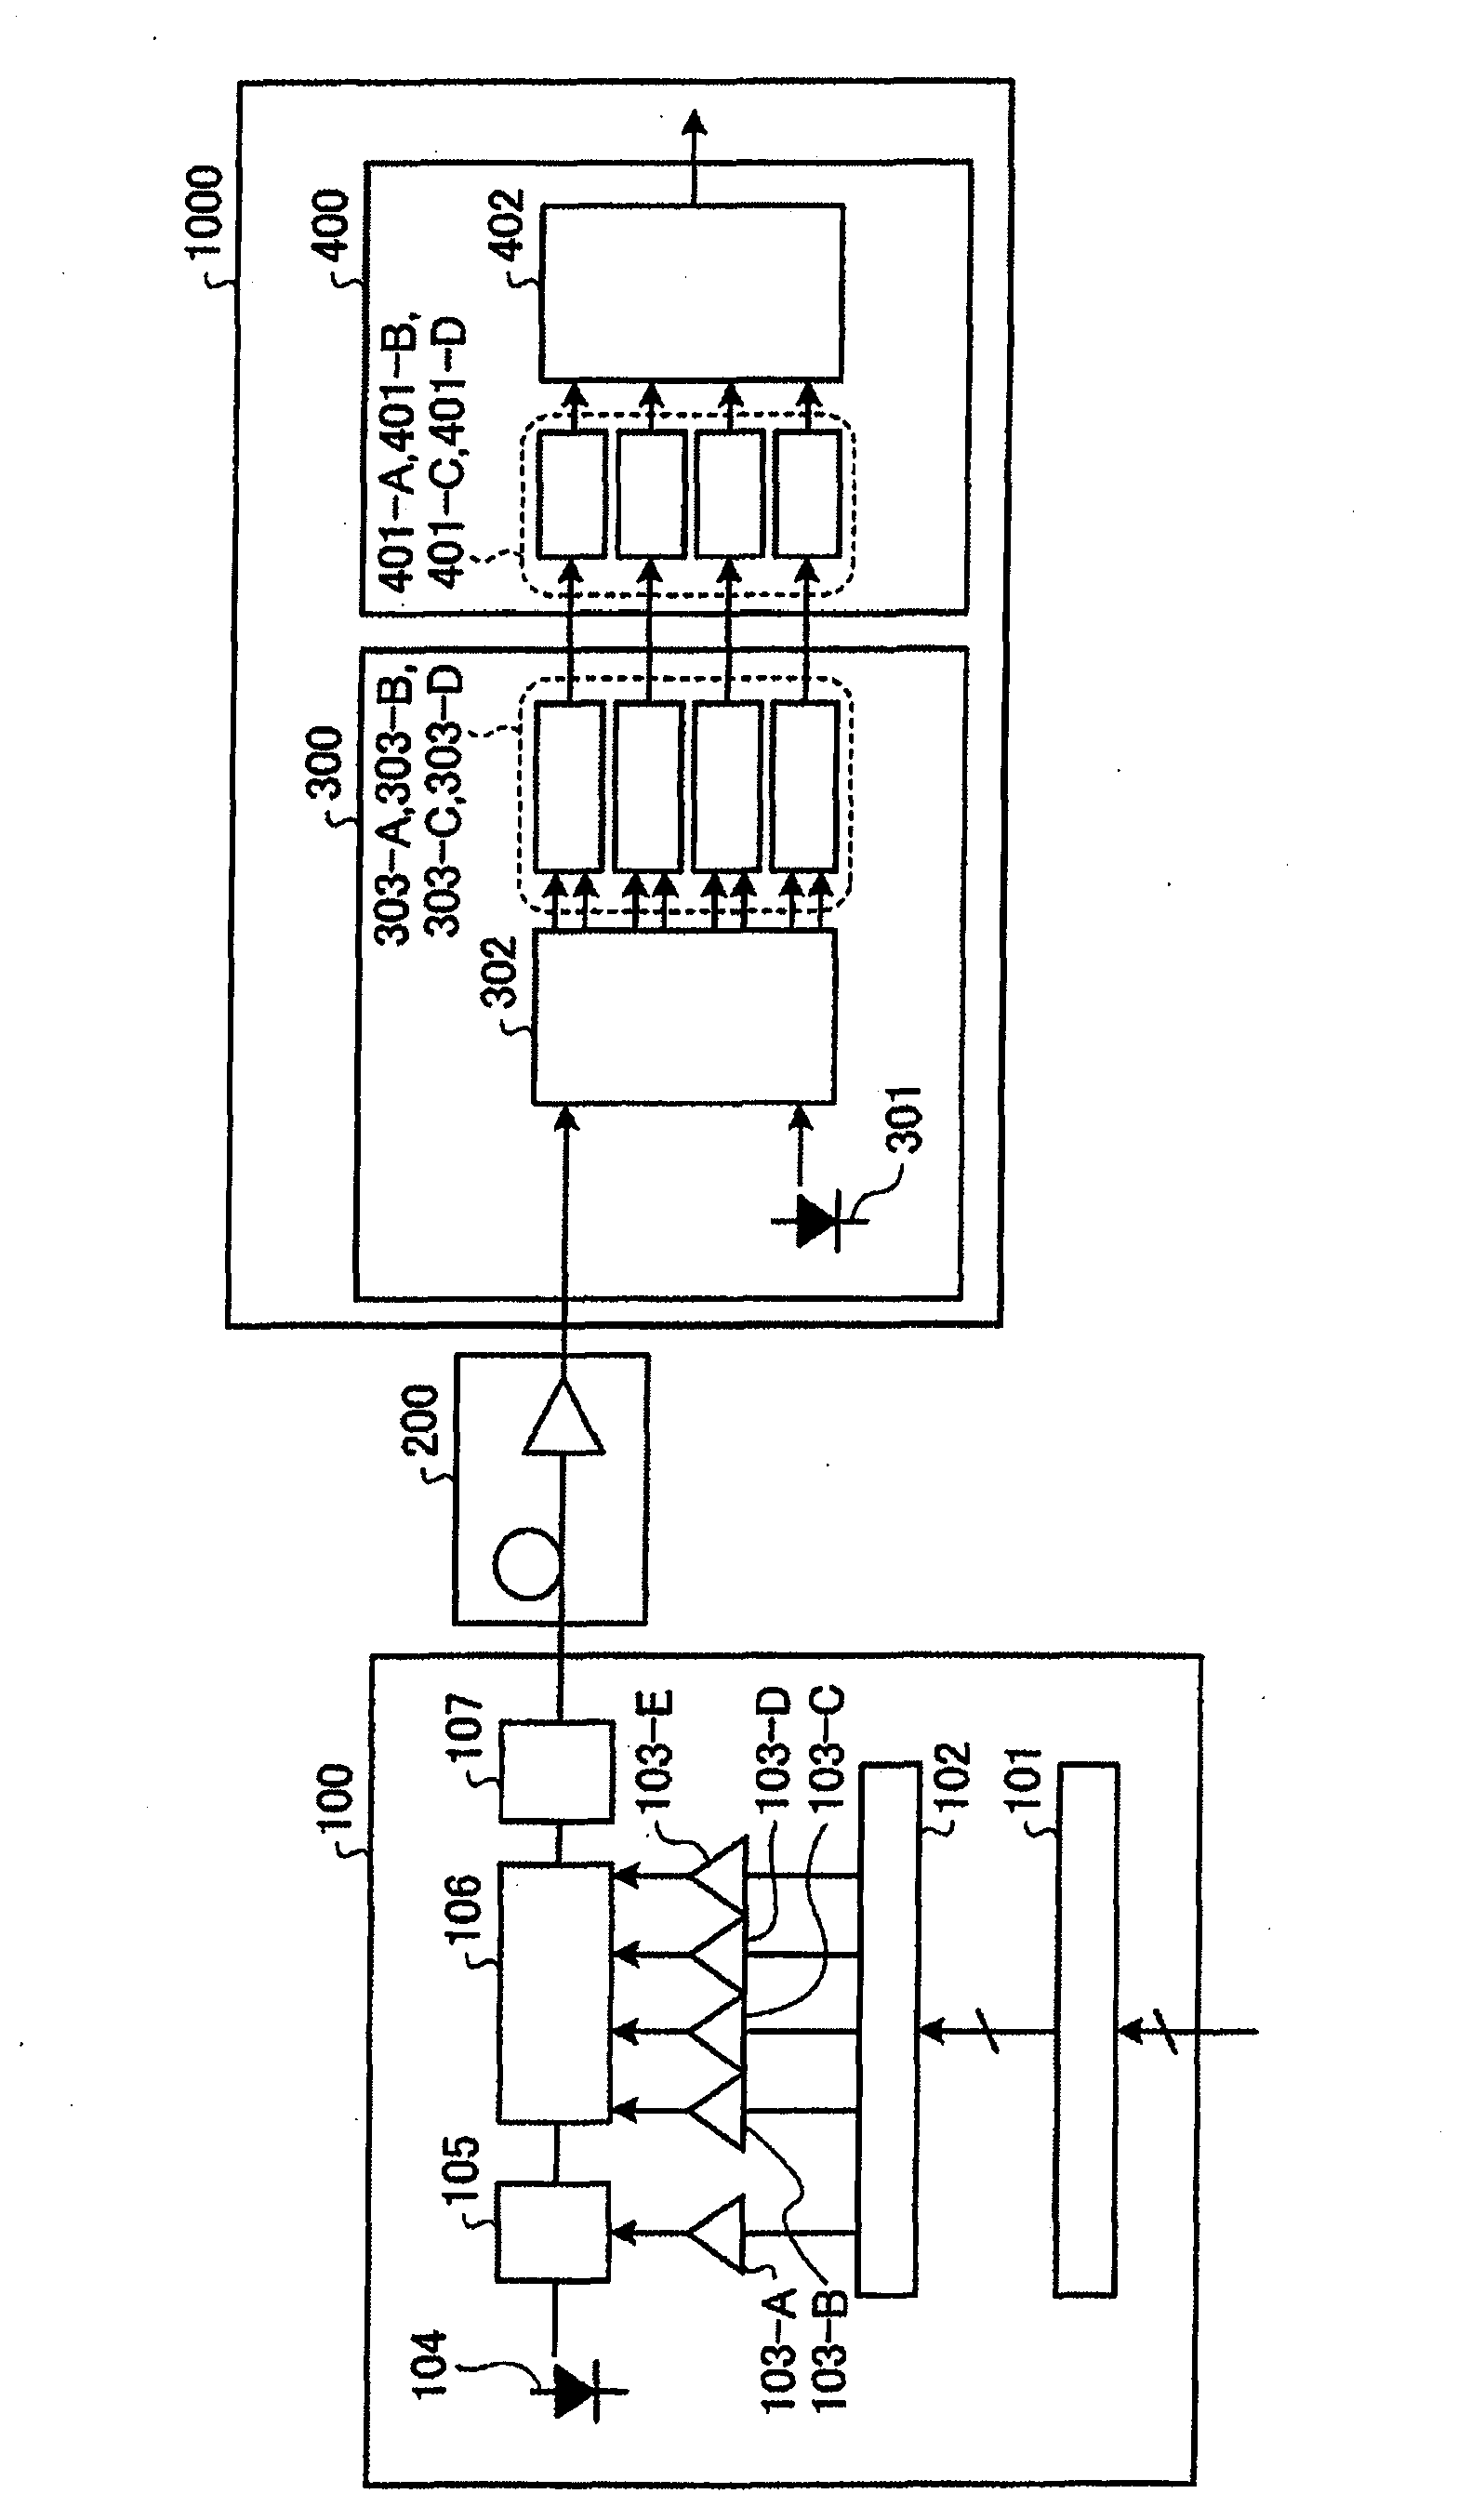 Optical transport system, optical transmitter device and optical receiver device